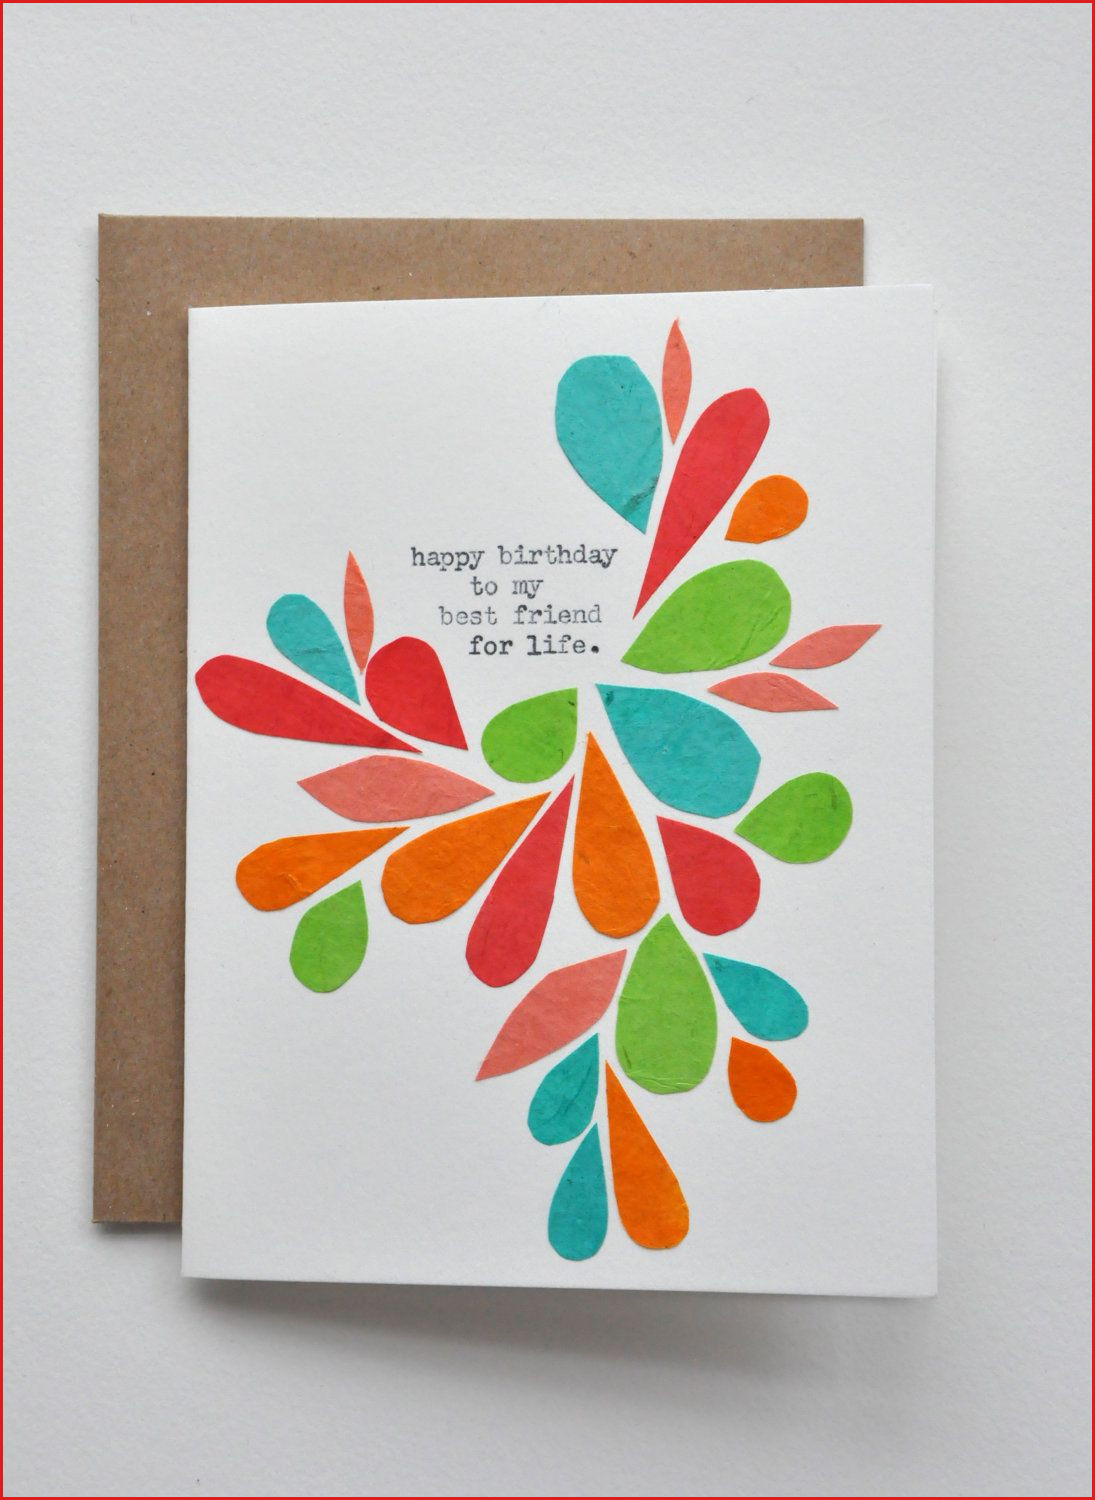 Birthday Card Ideas For A Friend Cute Homemade Gifts For My Best Friend Gift Ideas